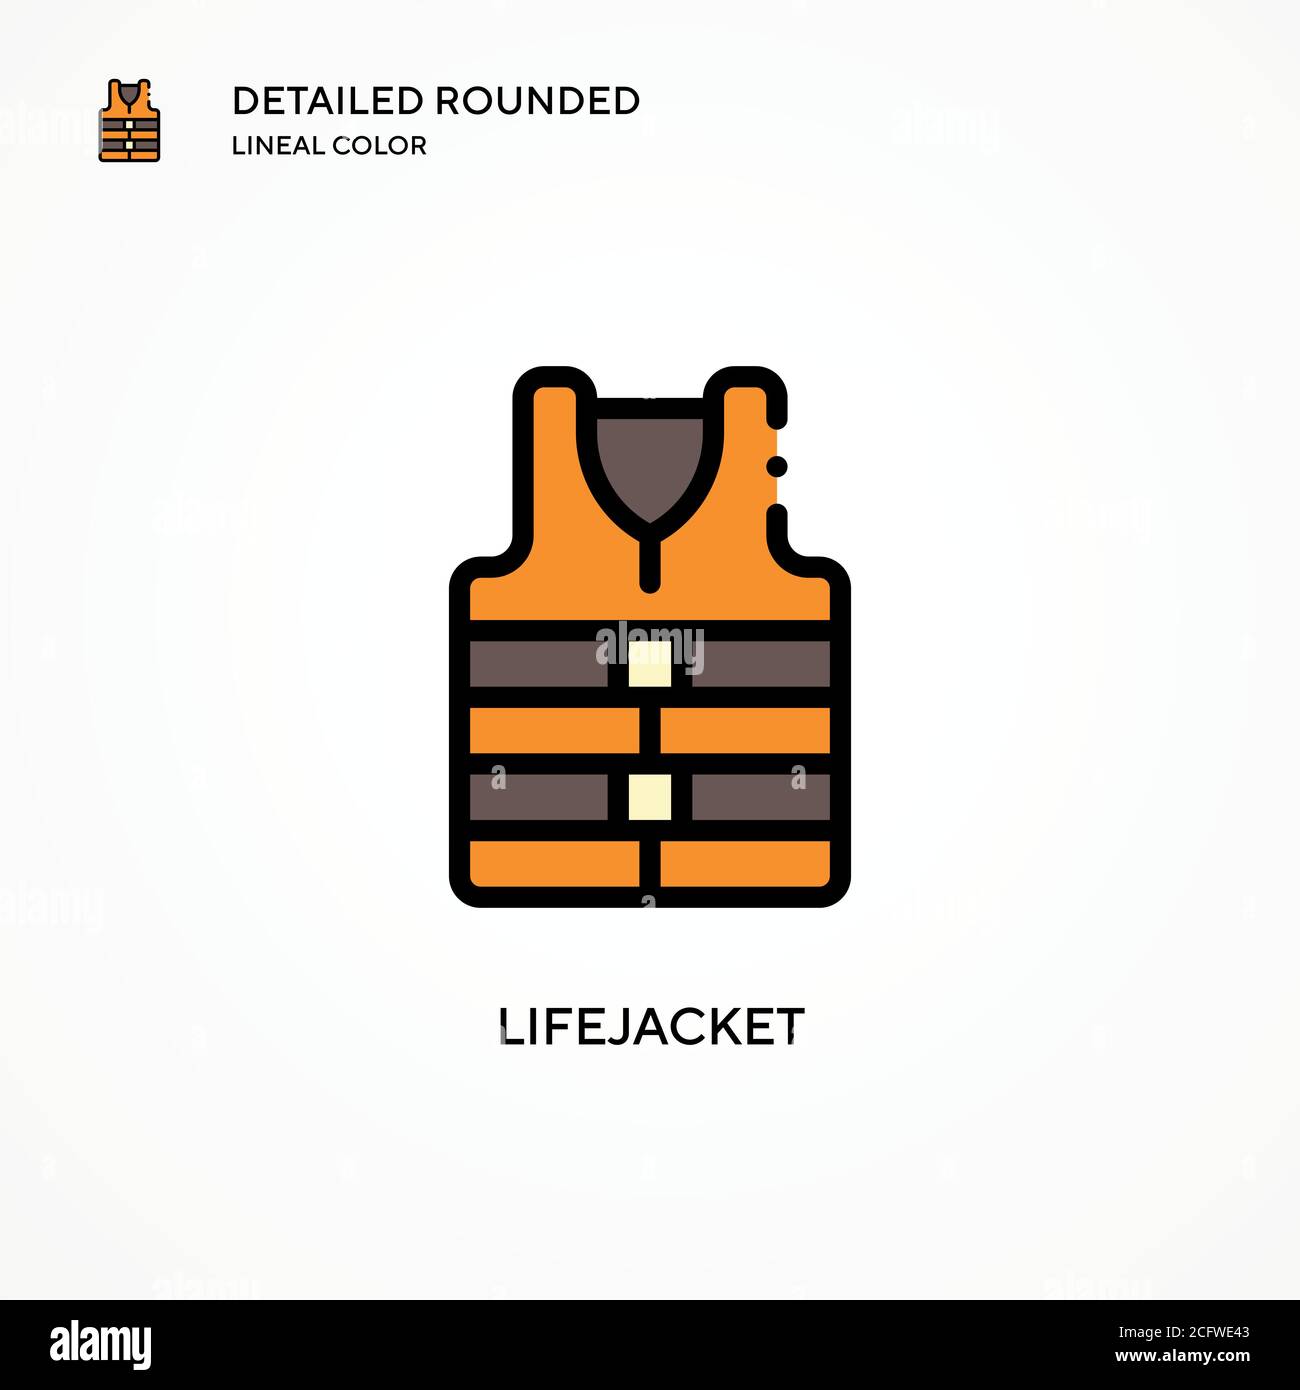 Lifejacket vector icon. Modern vector illustration concepts. Easy to edit and customize. Stock Vector